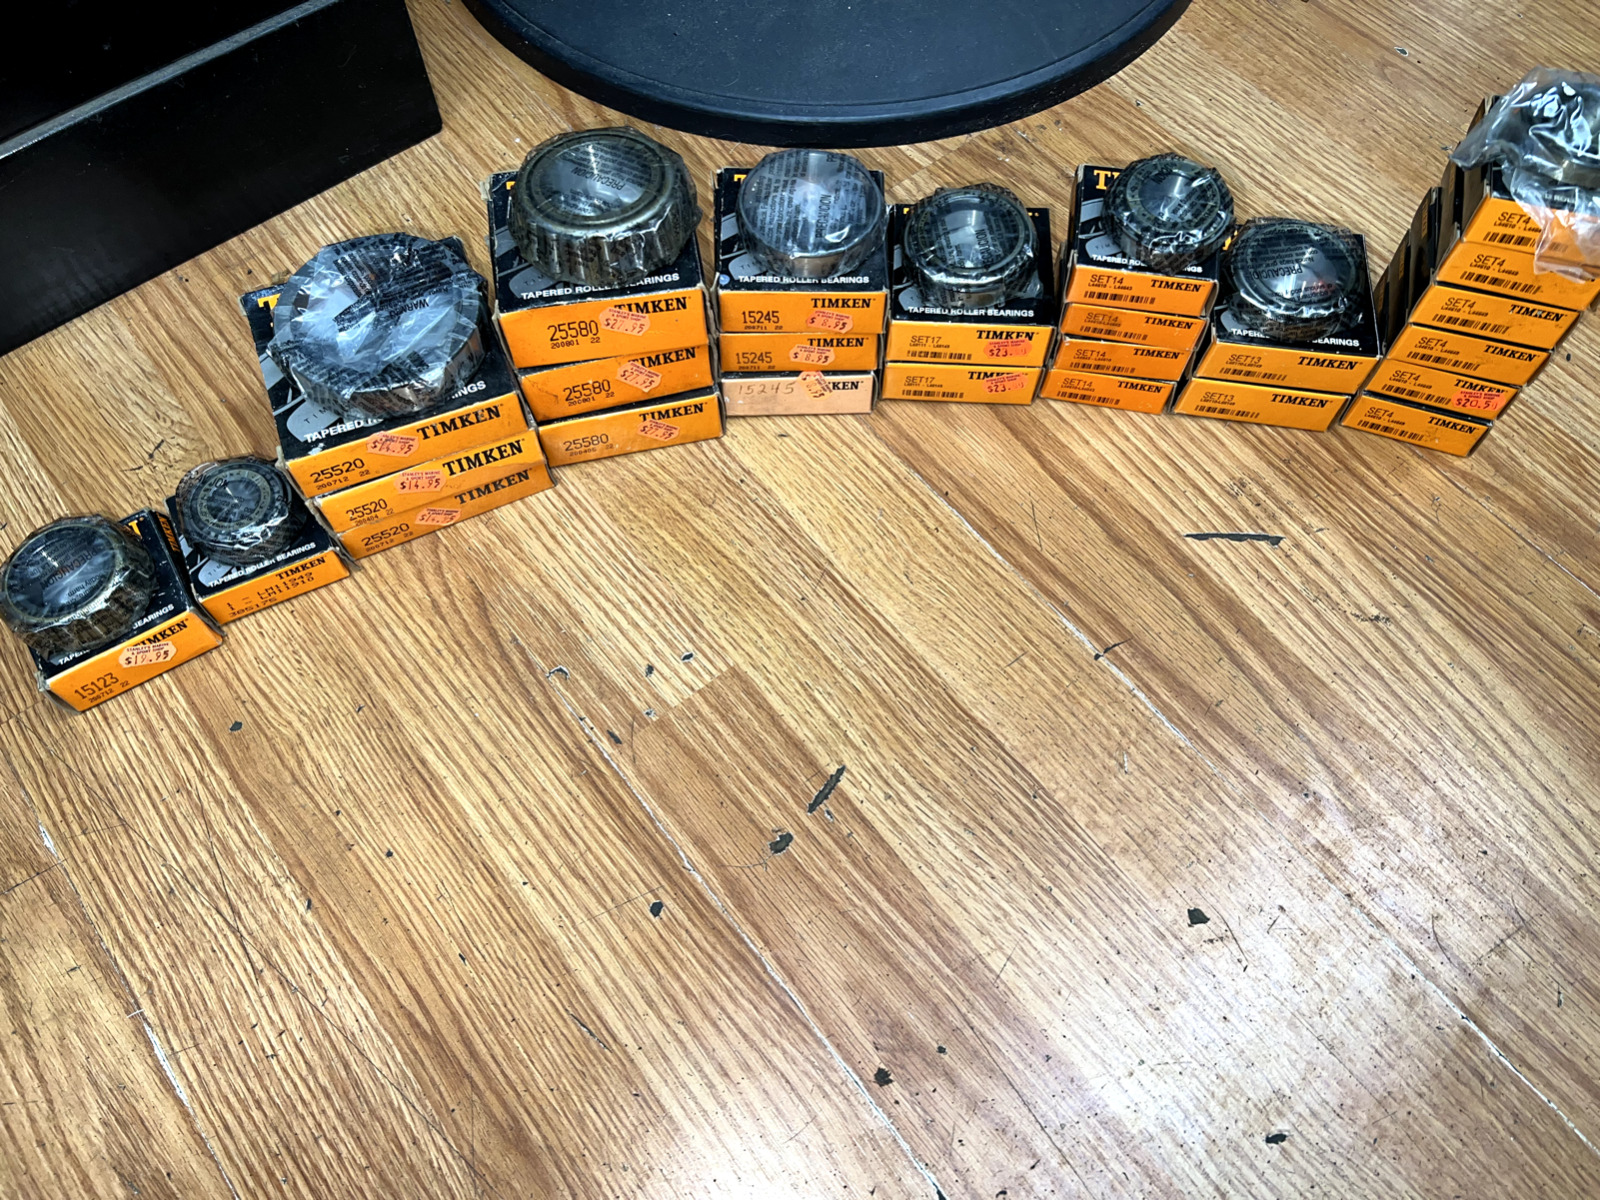 LOT OF 25 NEW TIMKEN CUPS BEARINGS FOR EVINRUDE JOHNSON